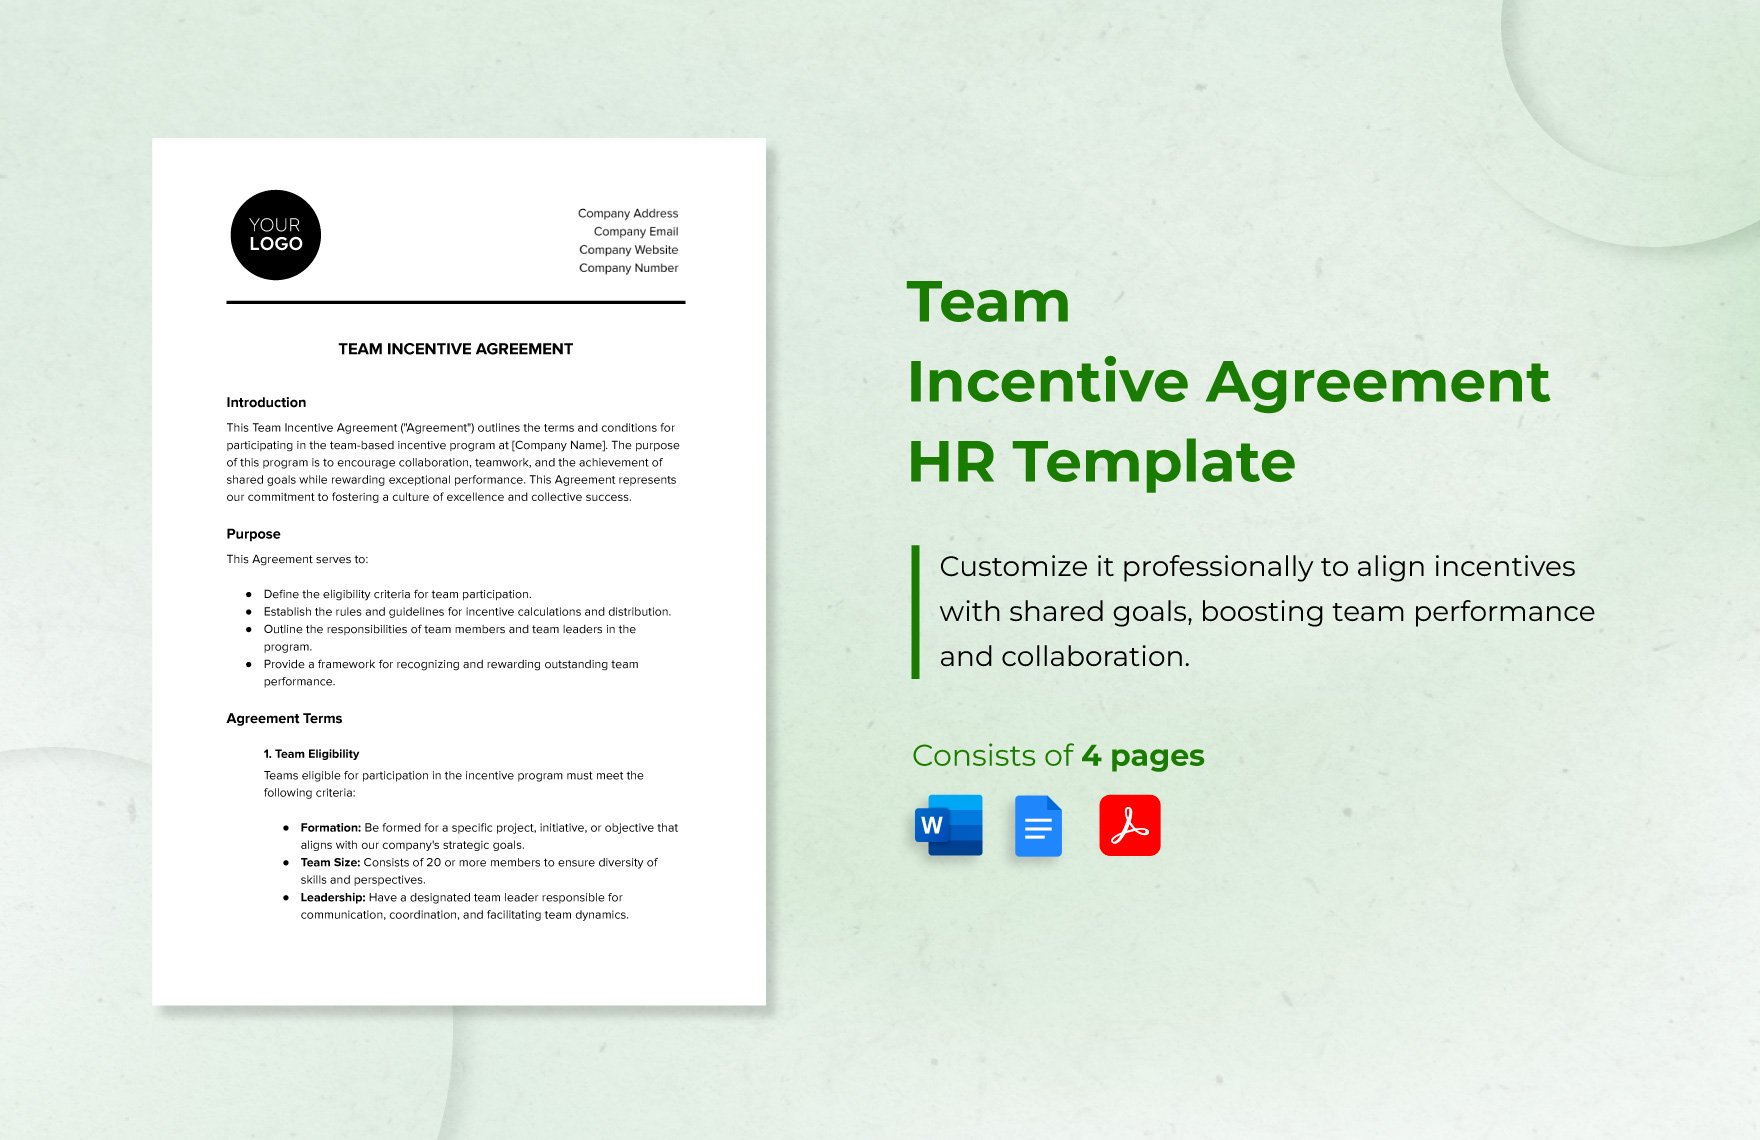 Team Incentive Agreement HR Template in Word, Google Docs, PDF